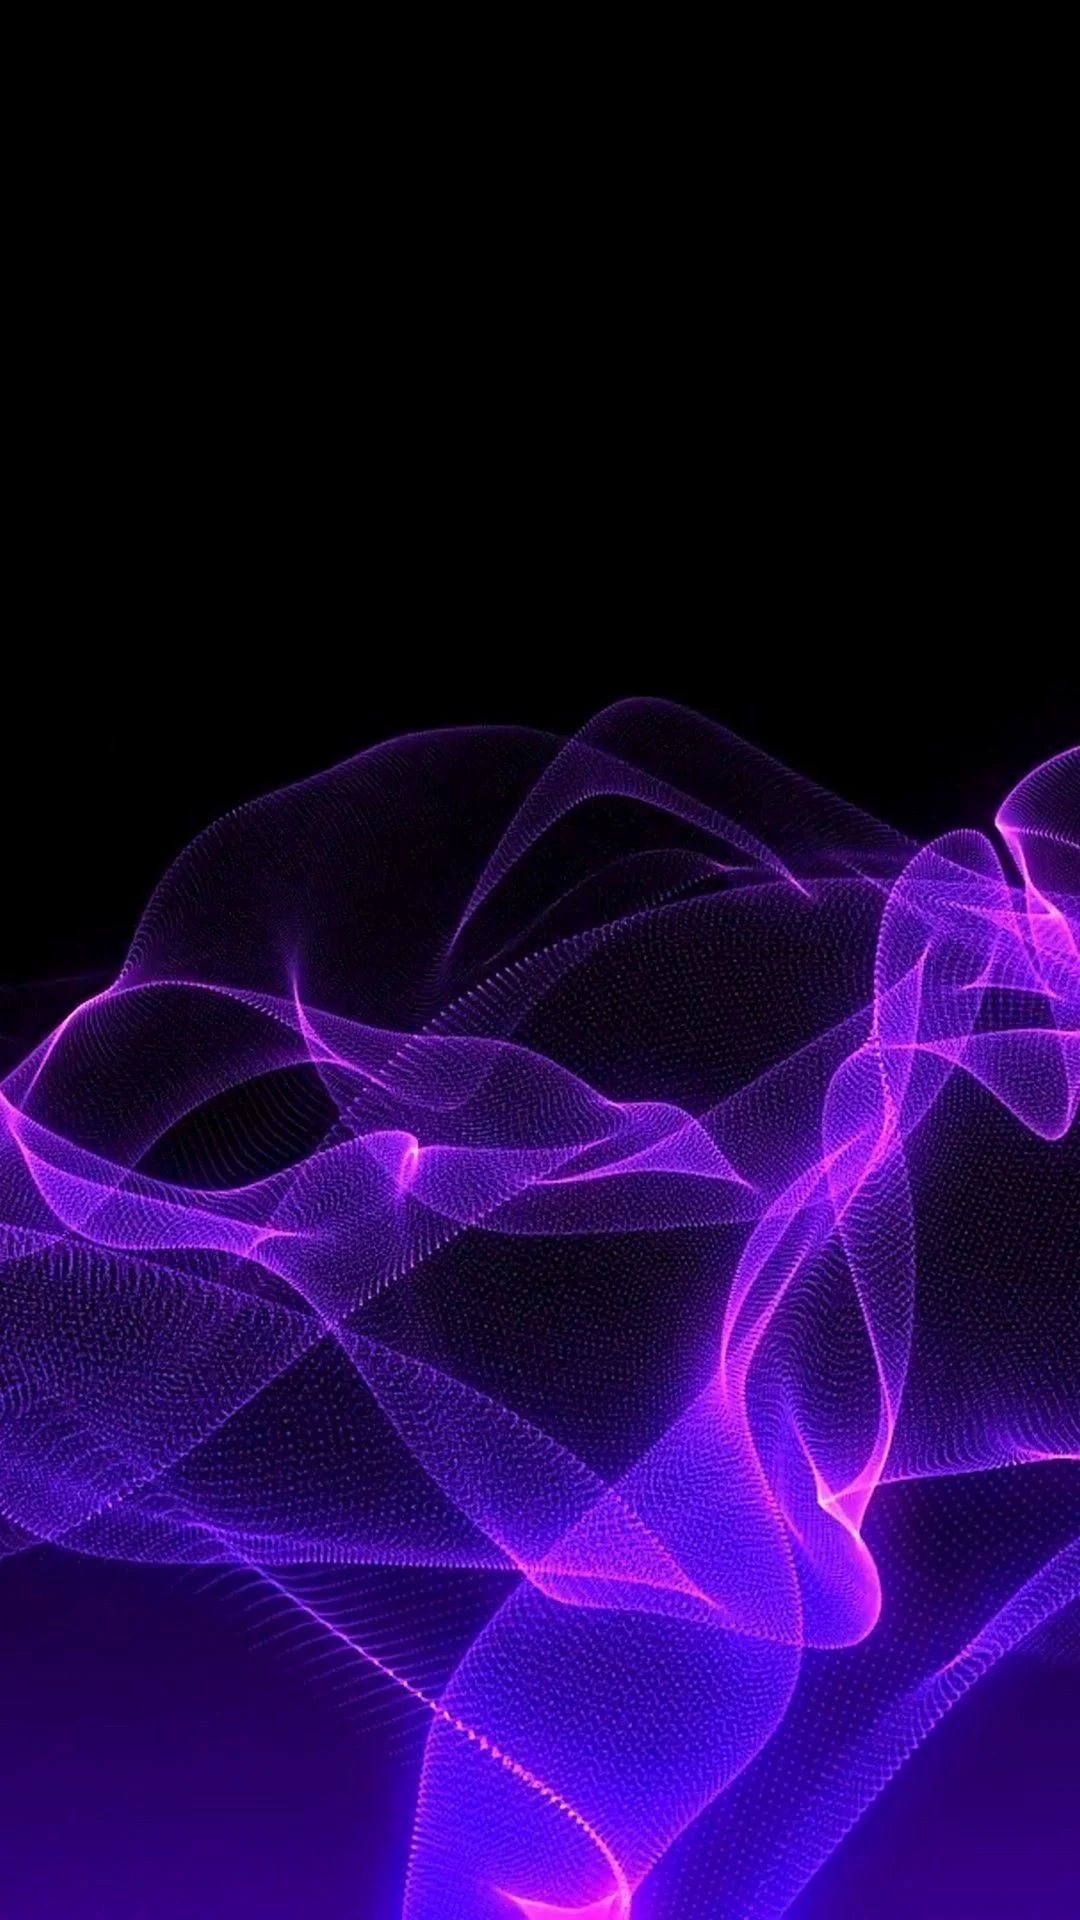 1080x1920 Black and Purple Phone Wallpapers Top Free Black and Purple Phone Backgrounds